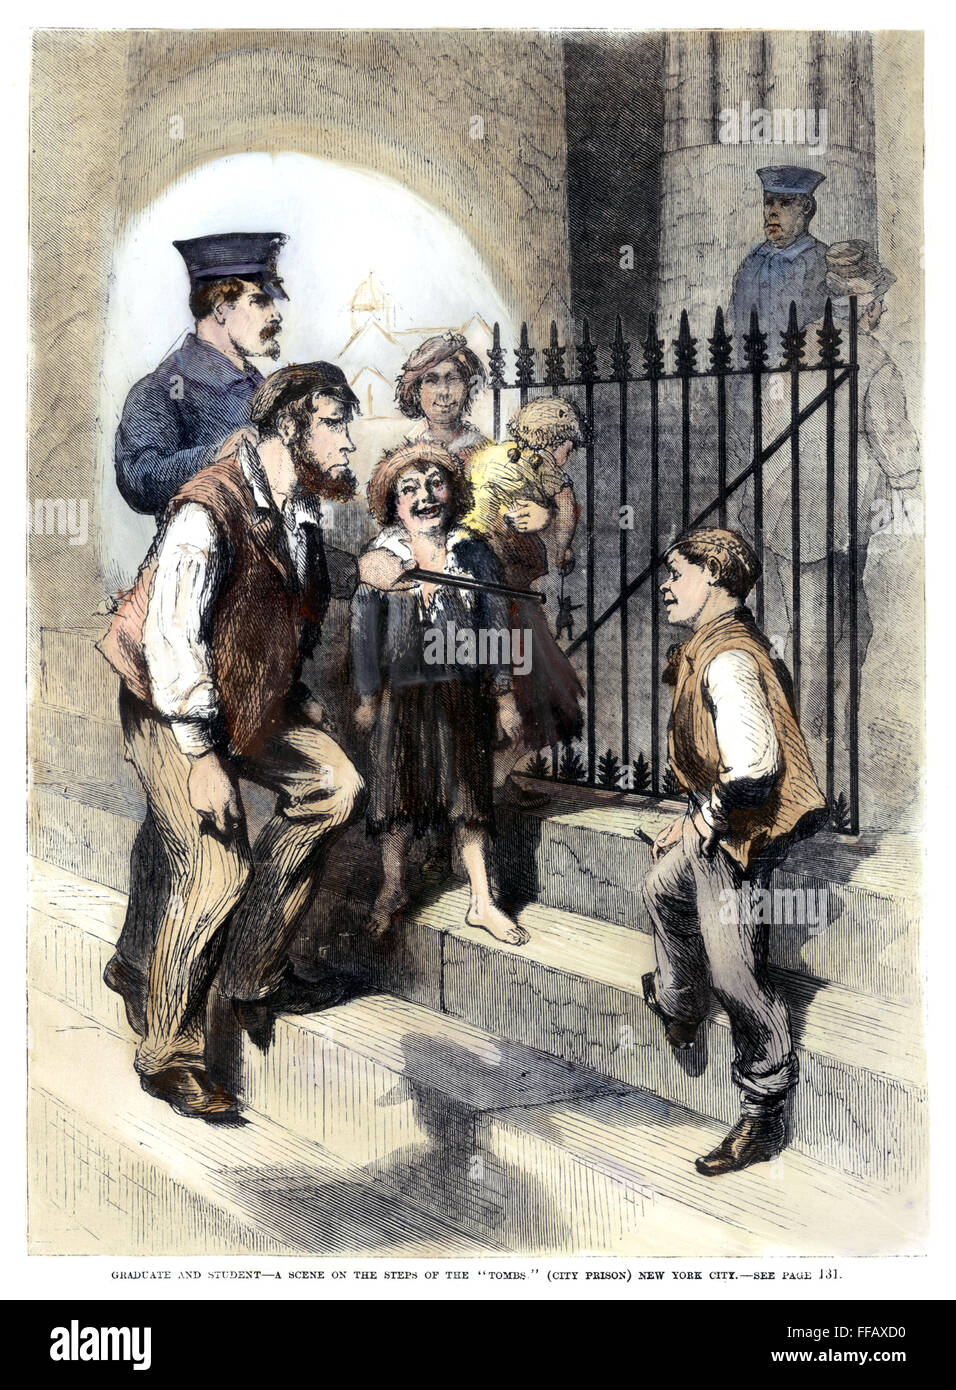 PRISON: THE TOMBS, 1868. /nScene on the steps of the Tombs, New York City: colored wood engraving, American, 1868. Stock Photo